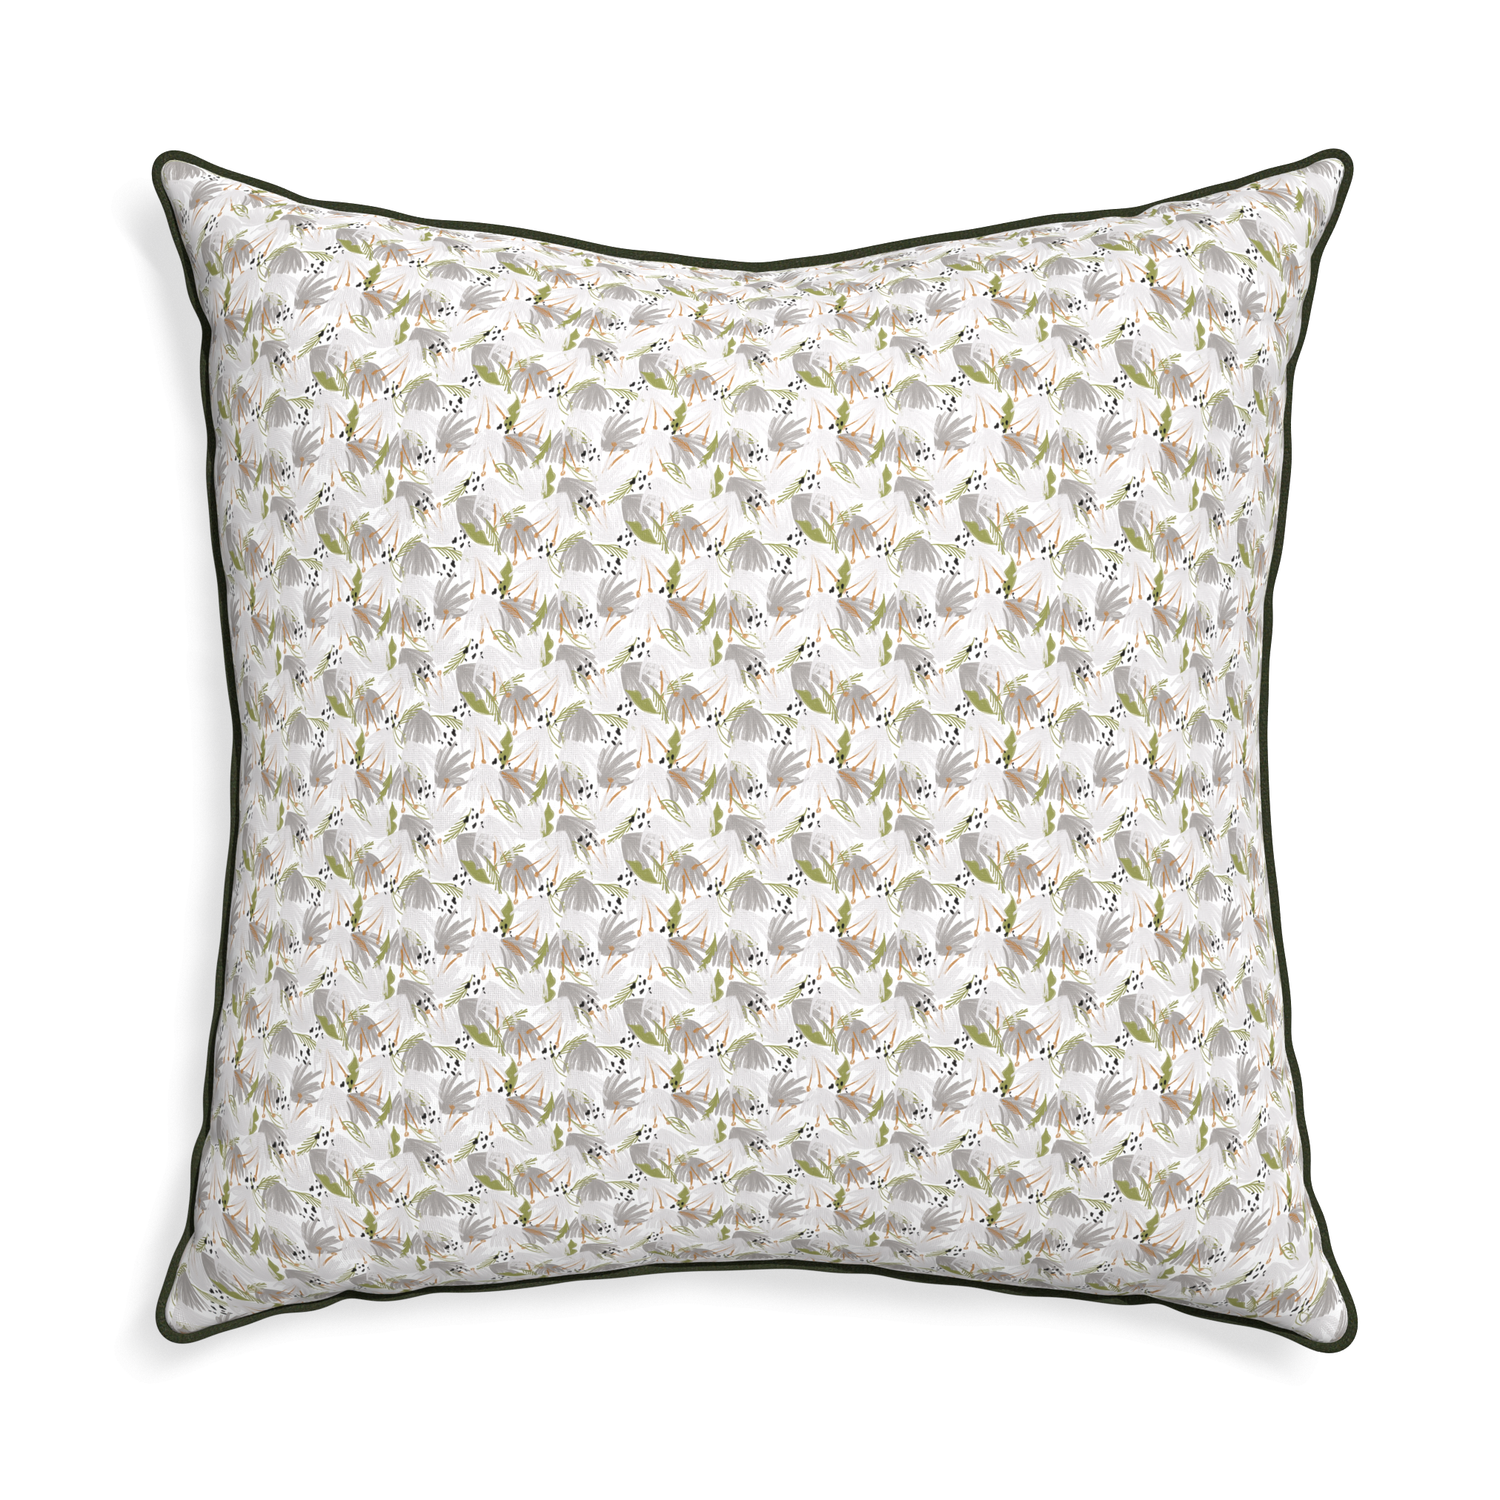 Euro-sham eden grey custom grey floralpillow with f piping on white background